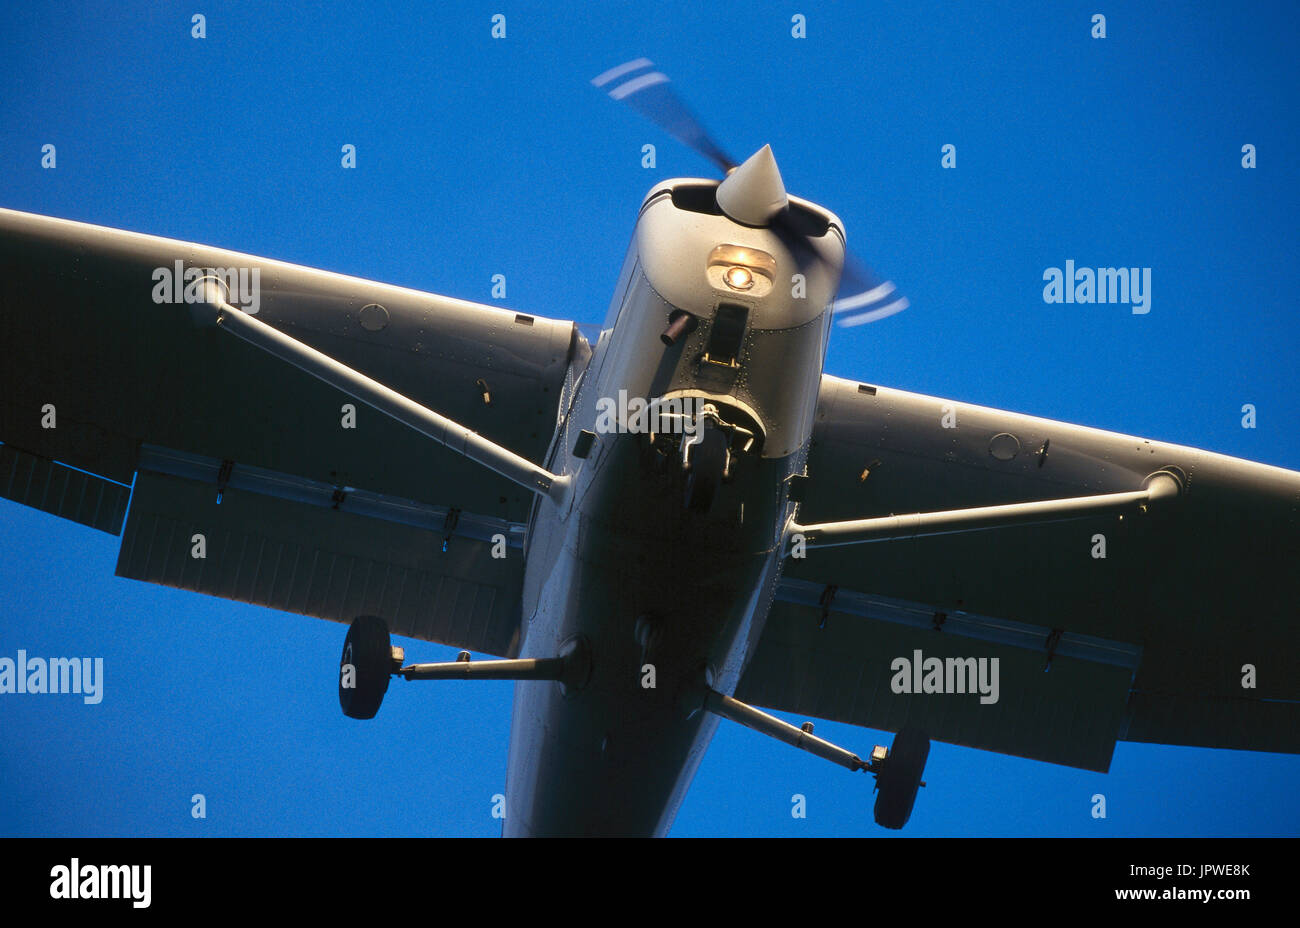 Cessna 152 on final-approach with flaps deployed Stock Photo